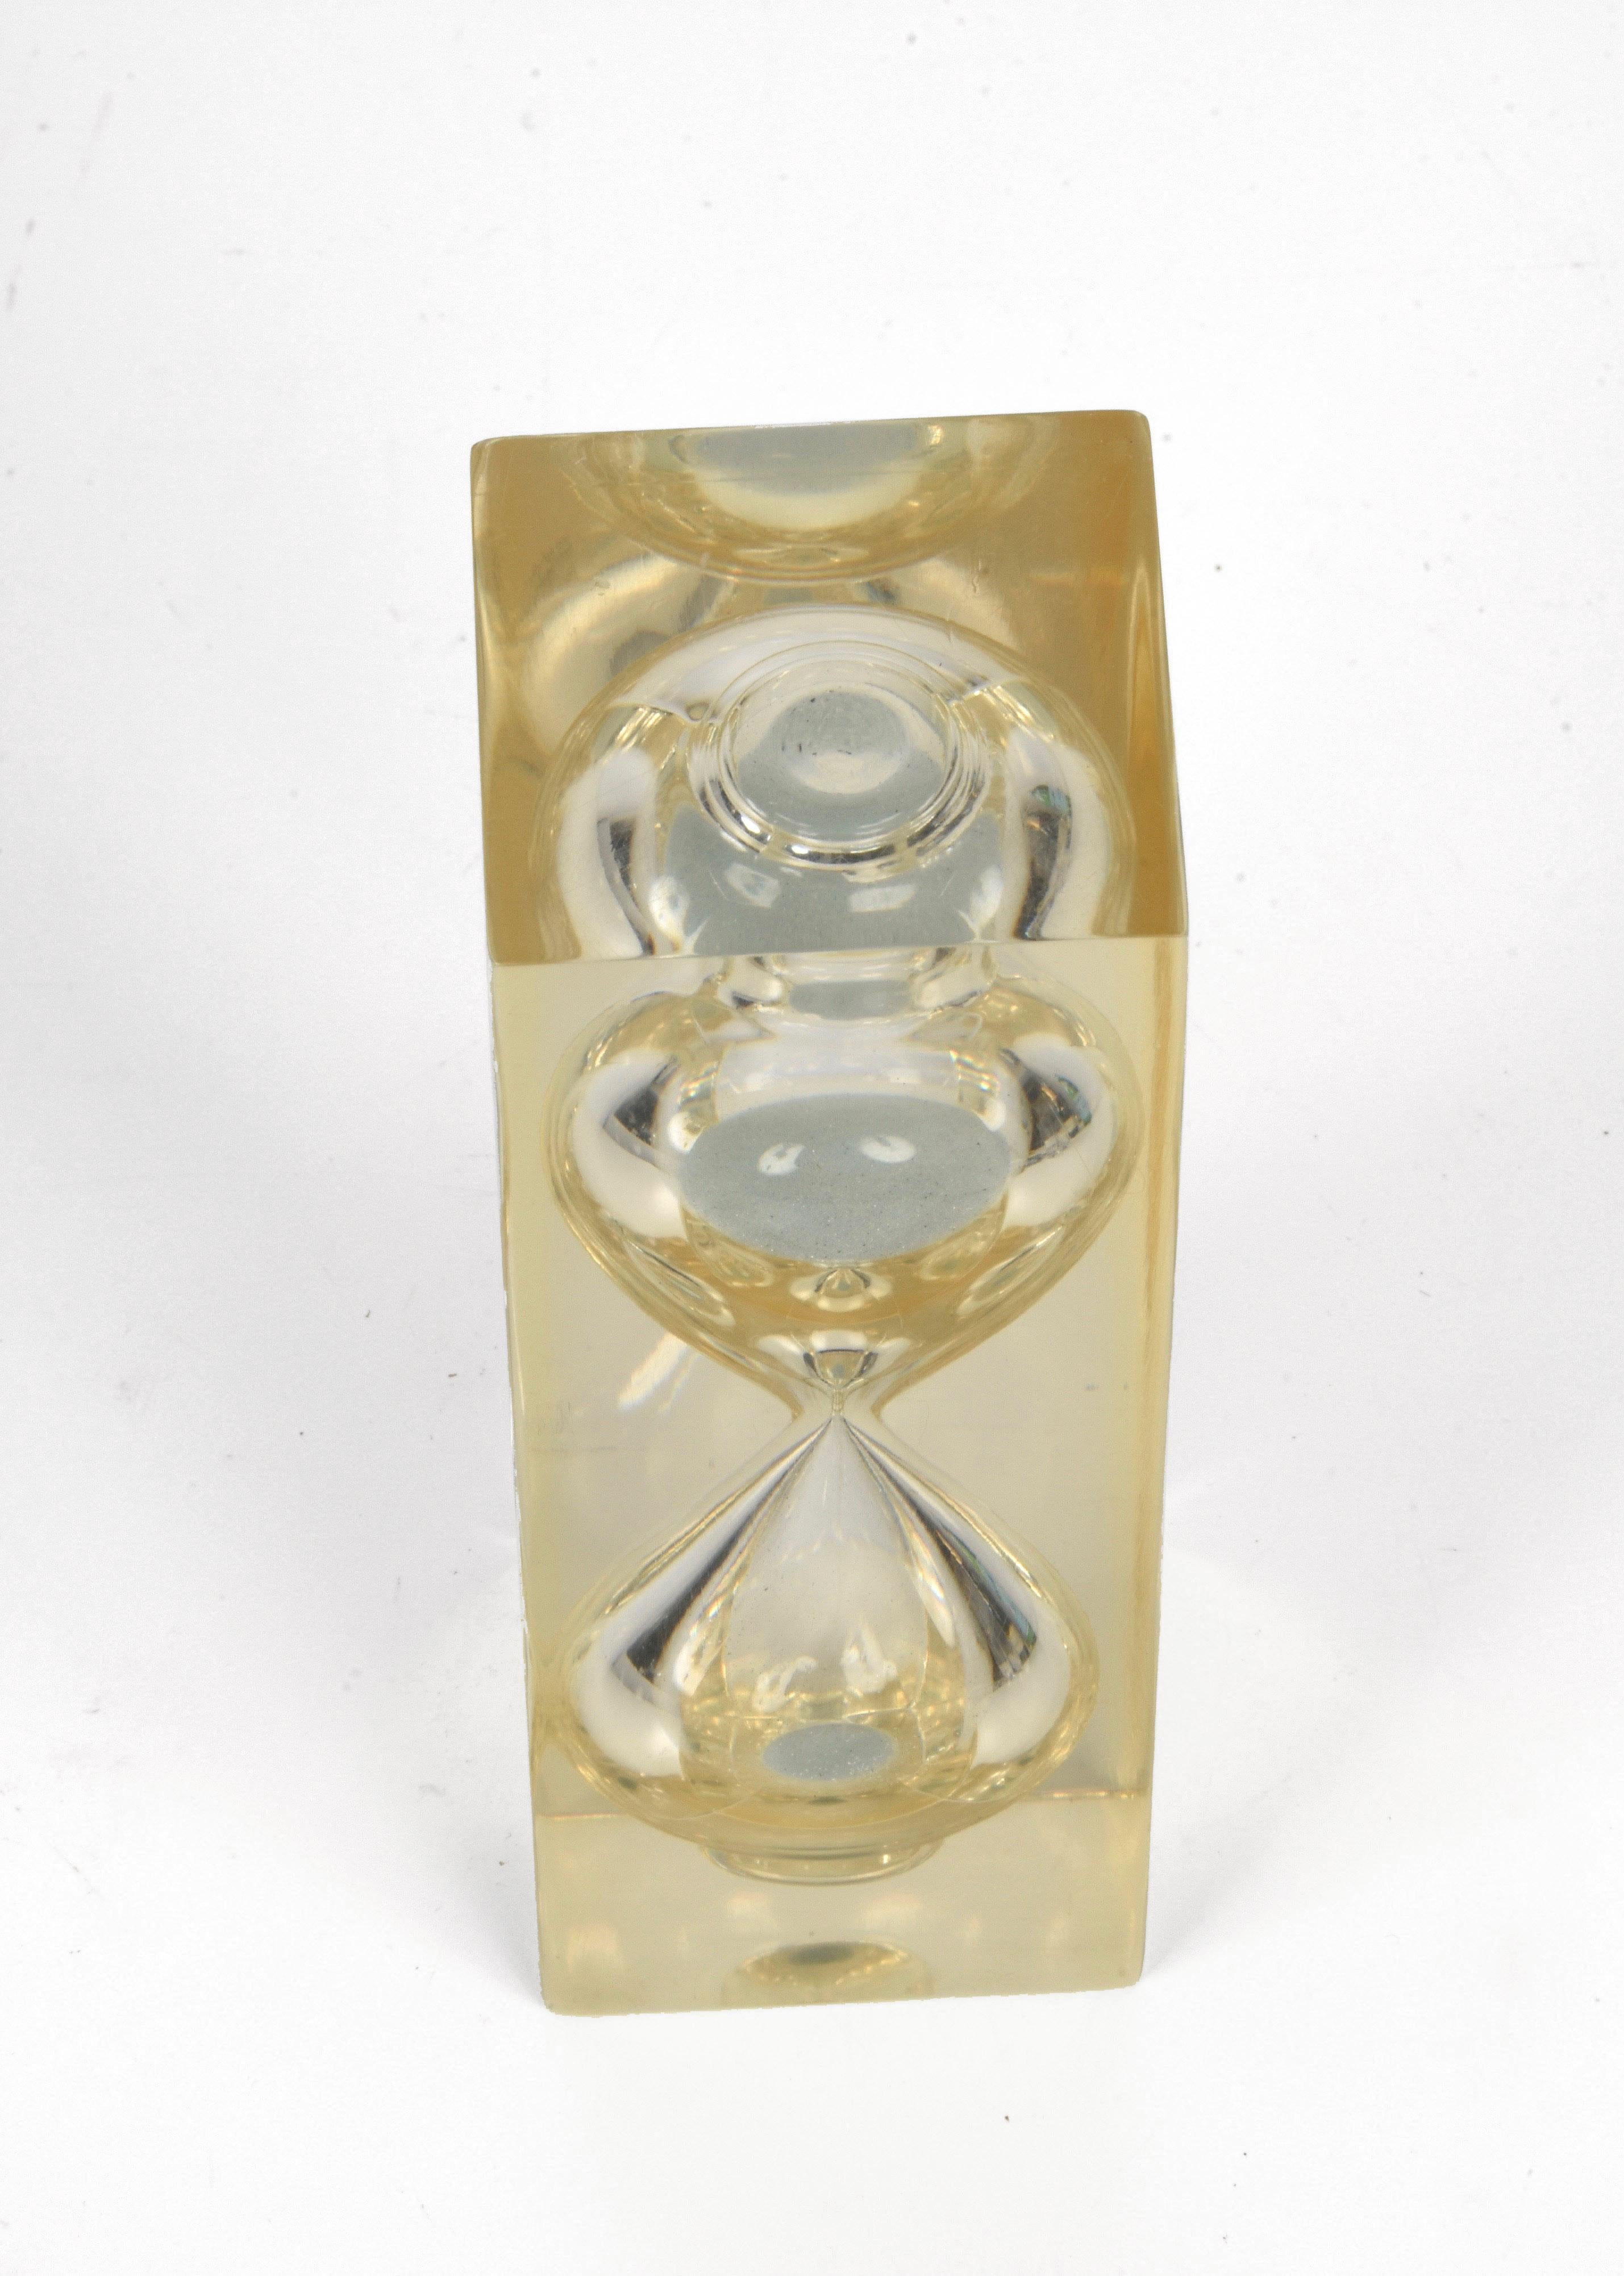 20th Century Midcentury Lucite Hourglass Sand Timer Sculpture After Charles Hollis Jones 1970 For Sale